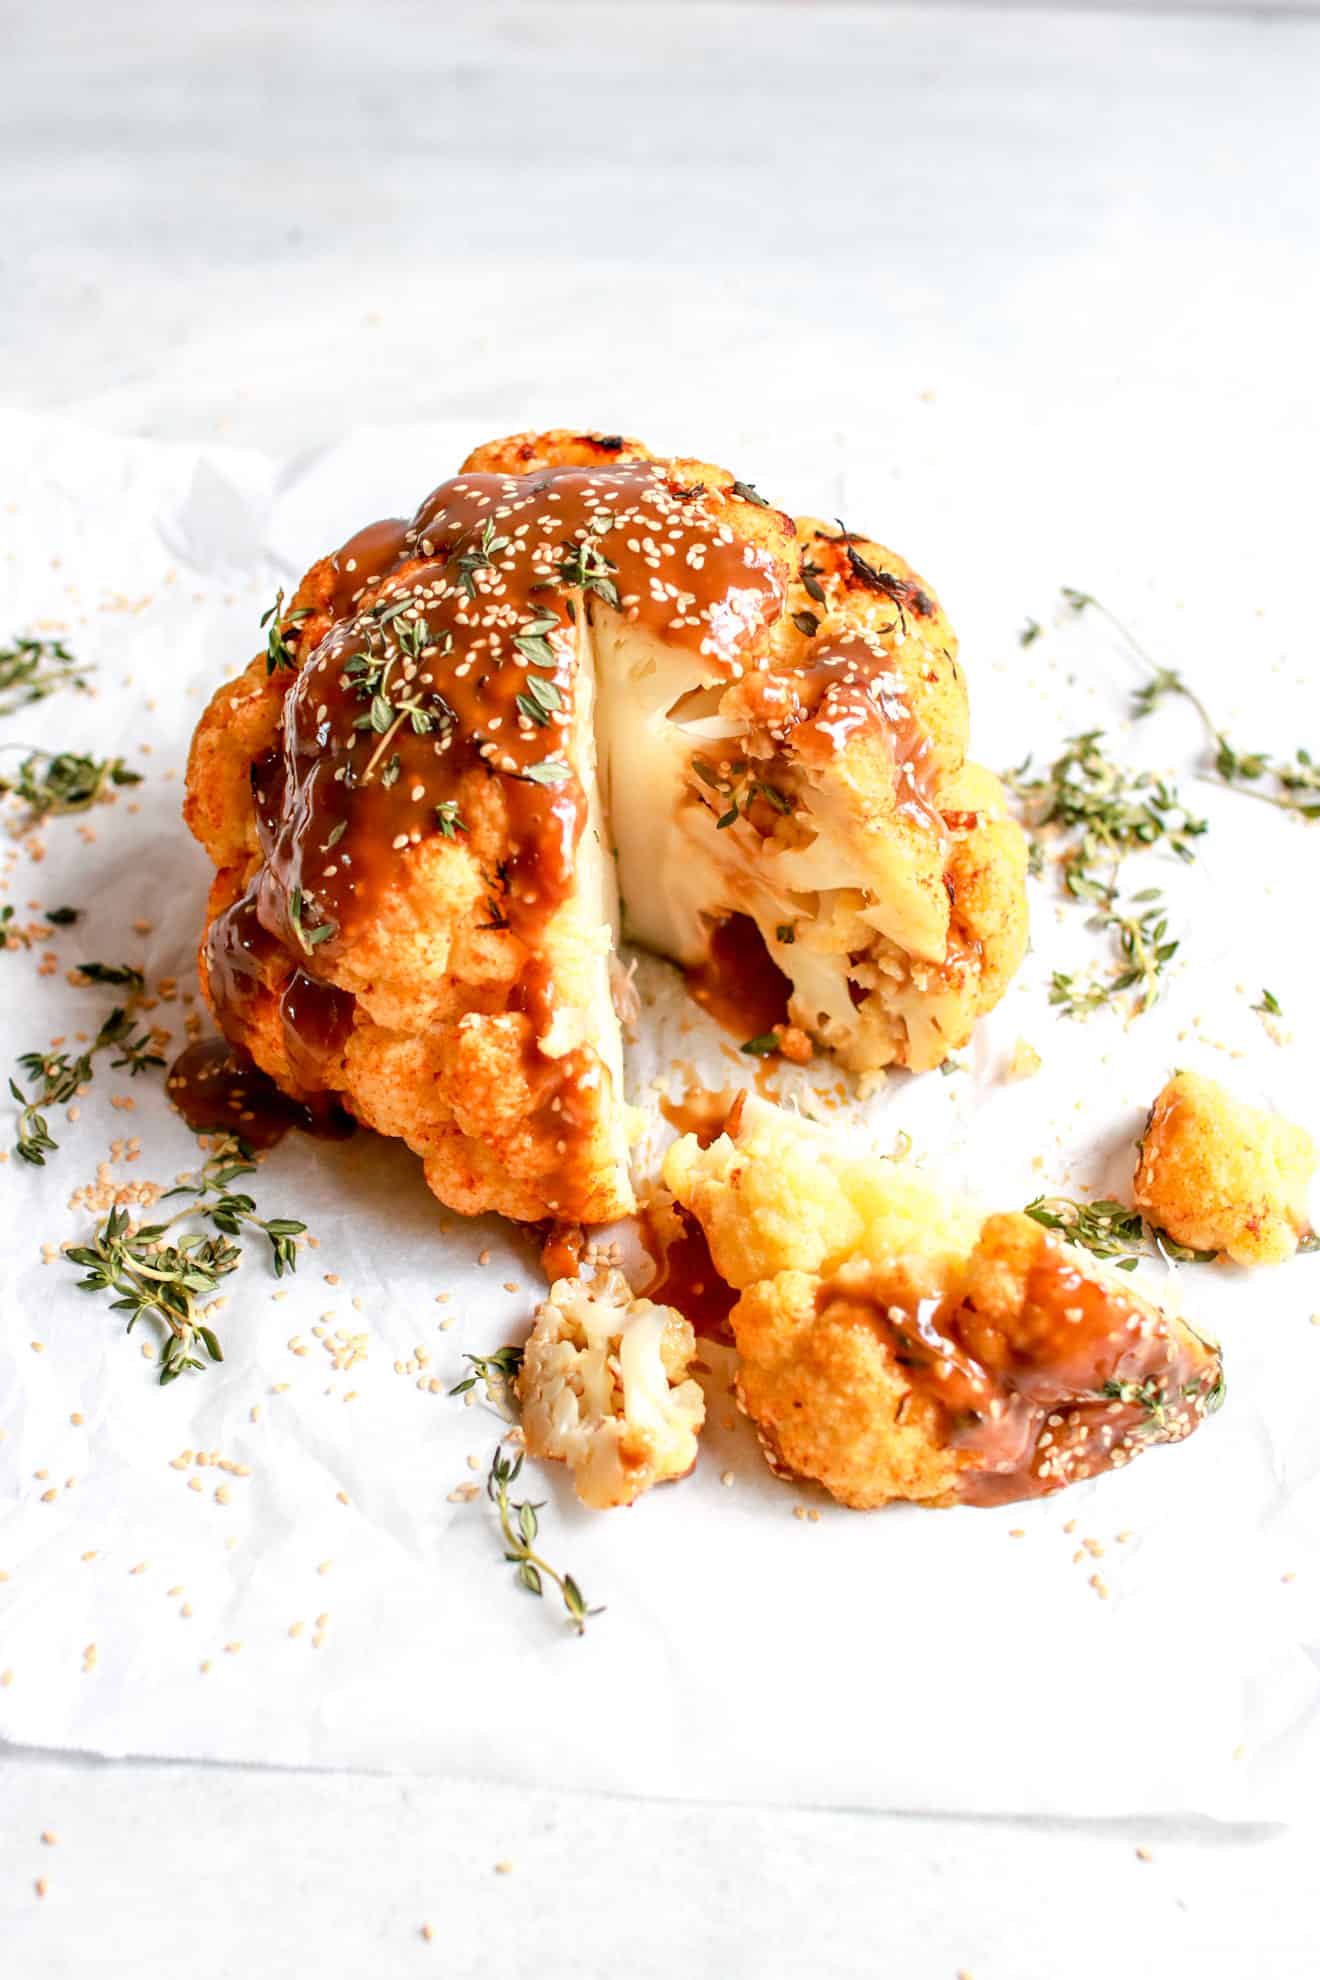 This image is a side view of a whole head of cauliflower with a drizzle of sauce on top, thyme leaves, sesame seeds, and a wedge sliced from the whole head. The head of cauliflower sides on a white piece of parchment paper on a white counter. 